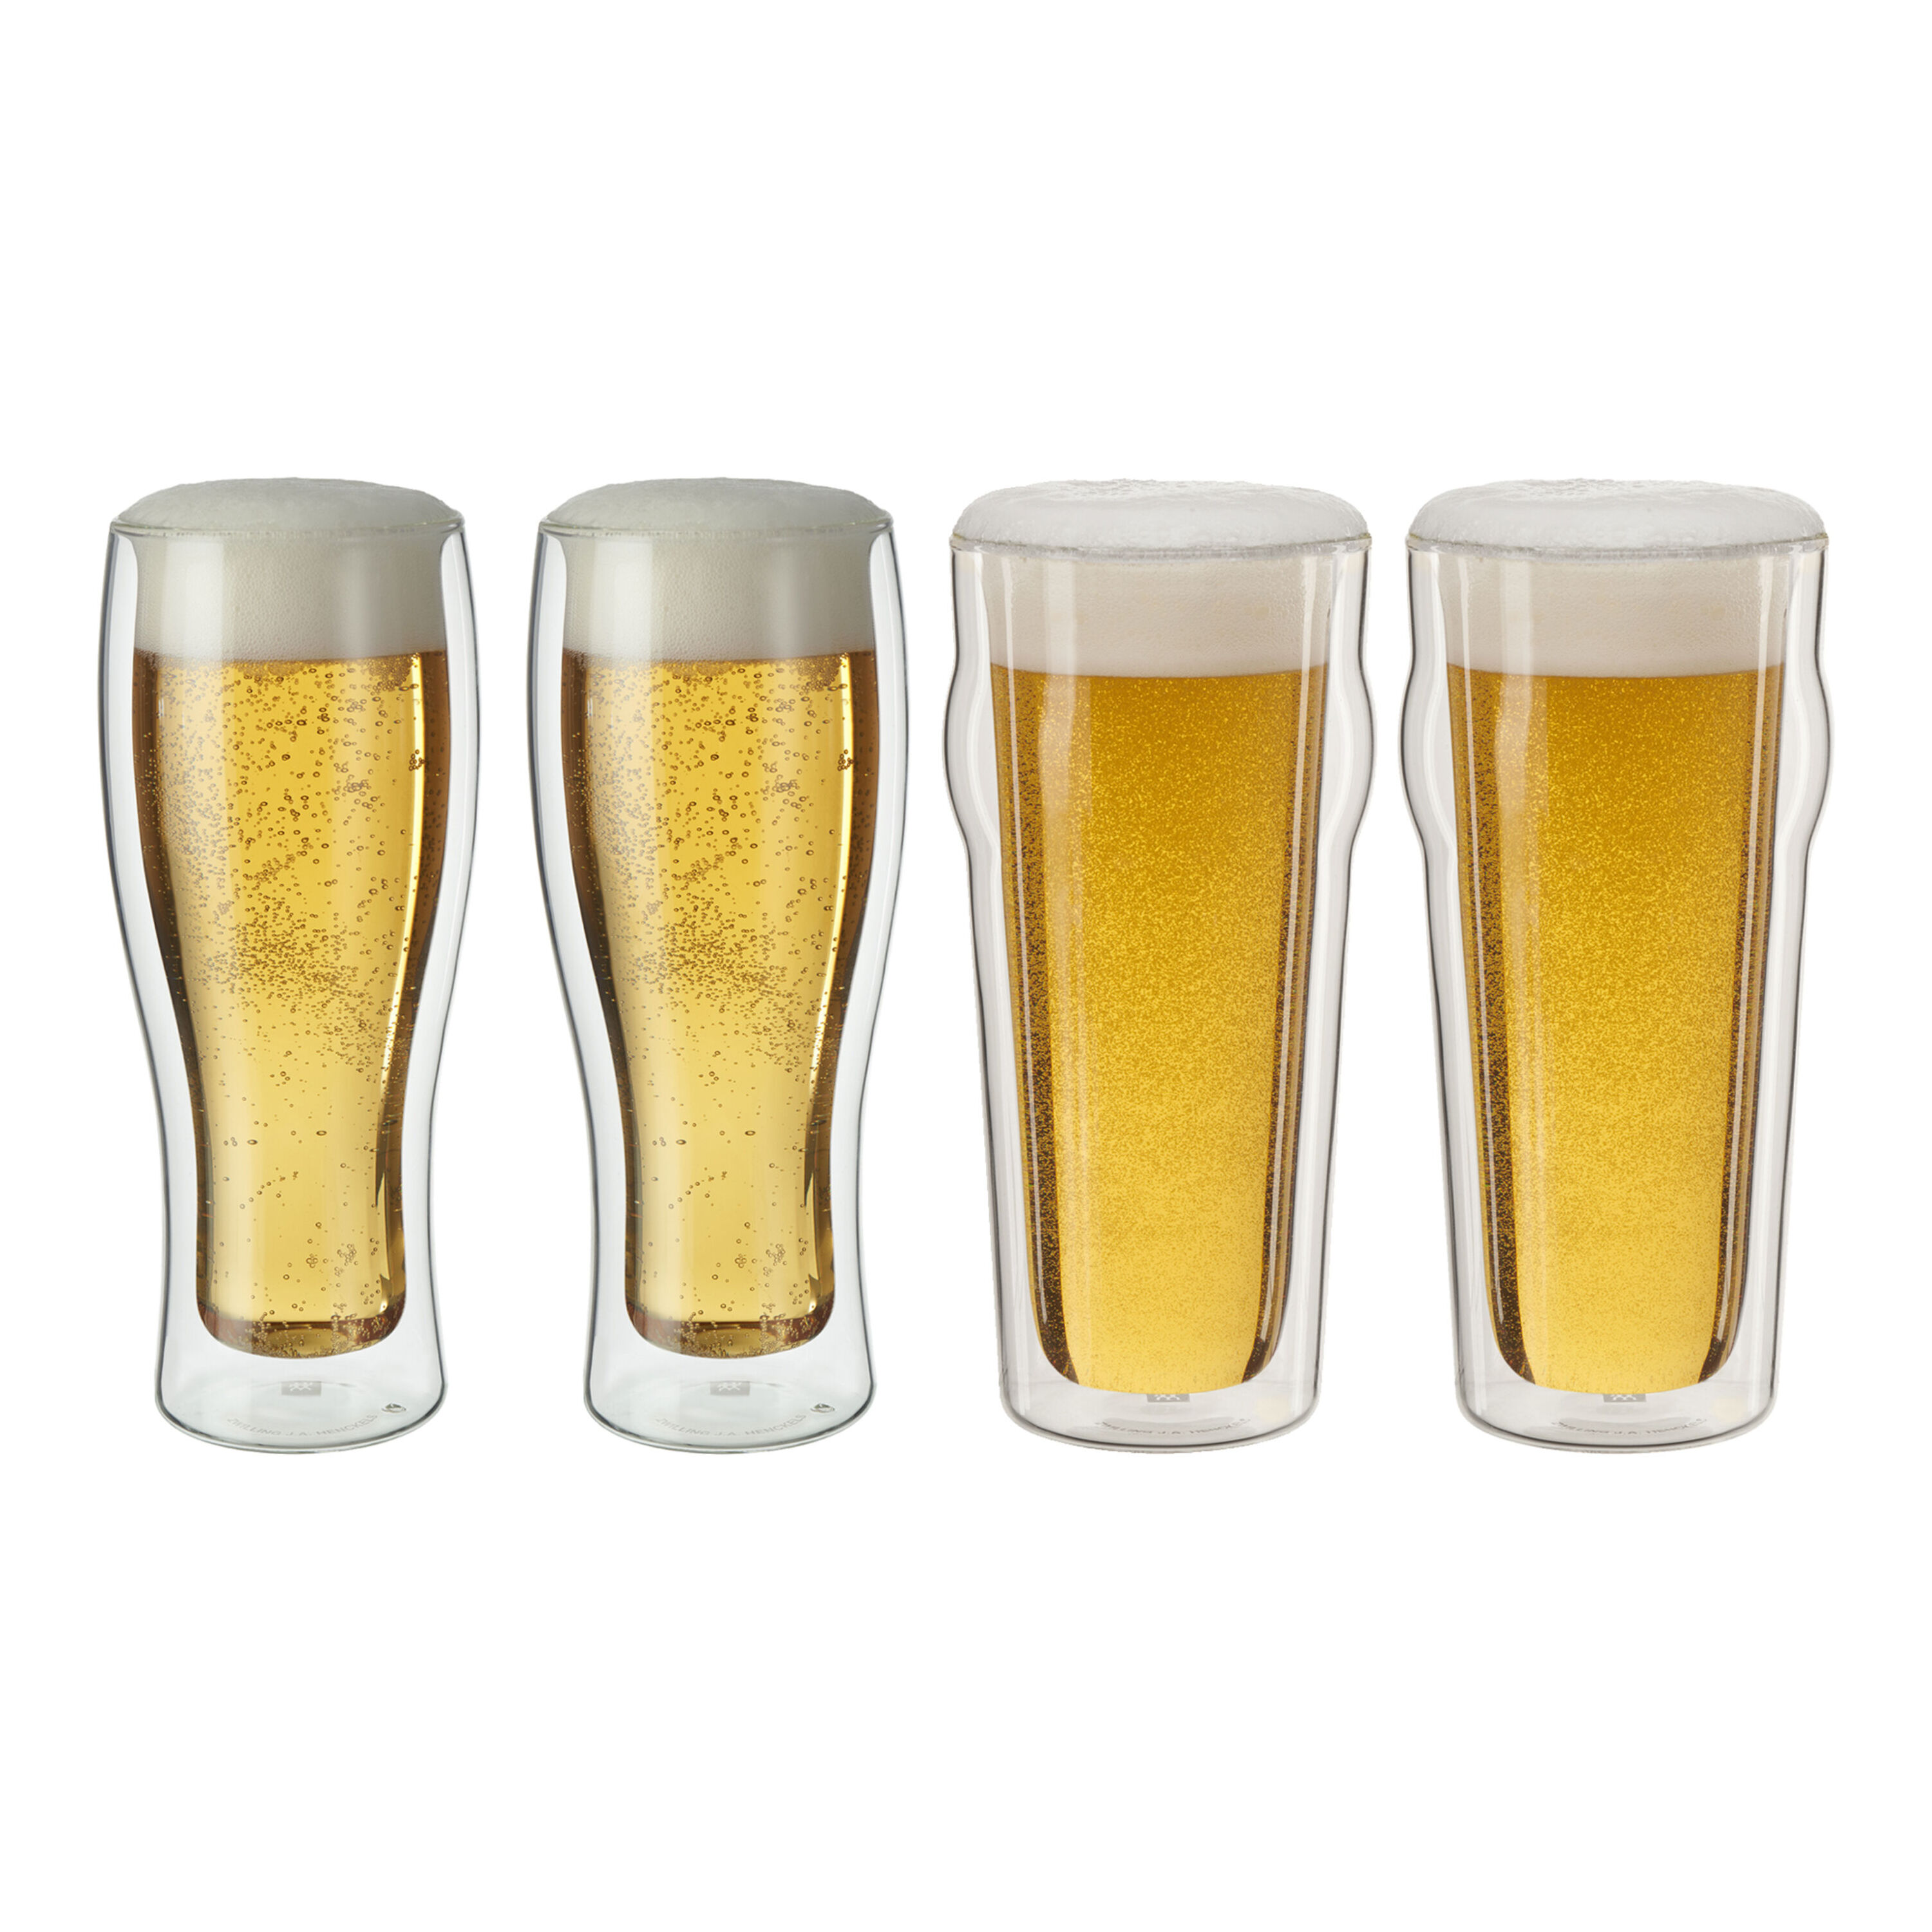 True Double Walled Beer Glasses - Insulated Pint Glasses -  Double Wall Glasses - Beer Mugs Clear 16oz Set of 2: Beer Glasses